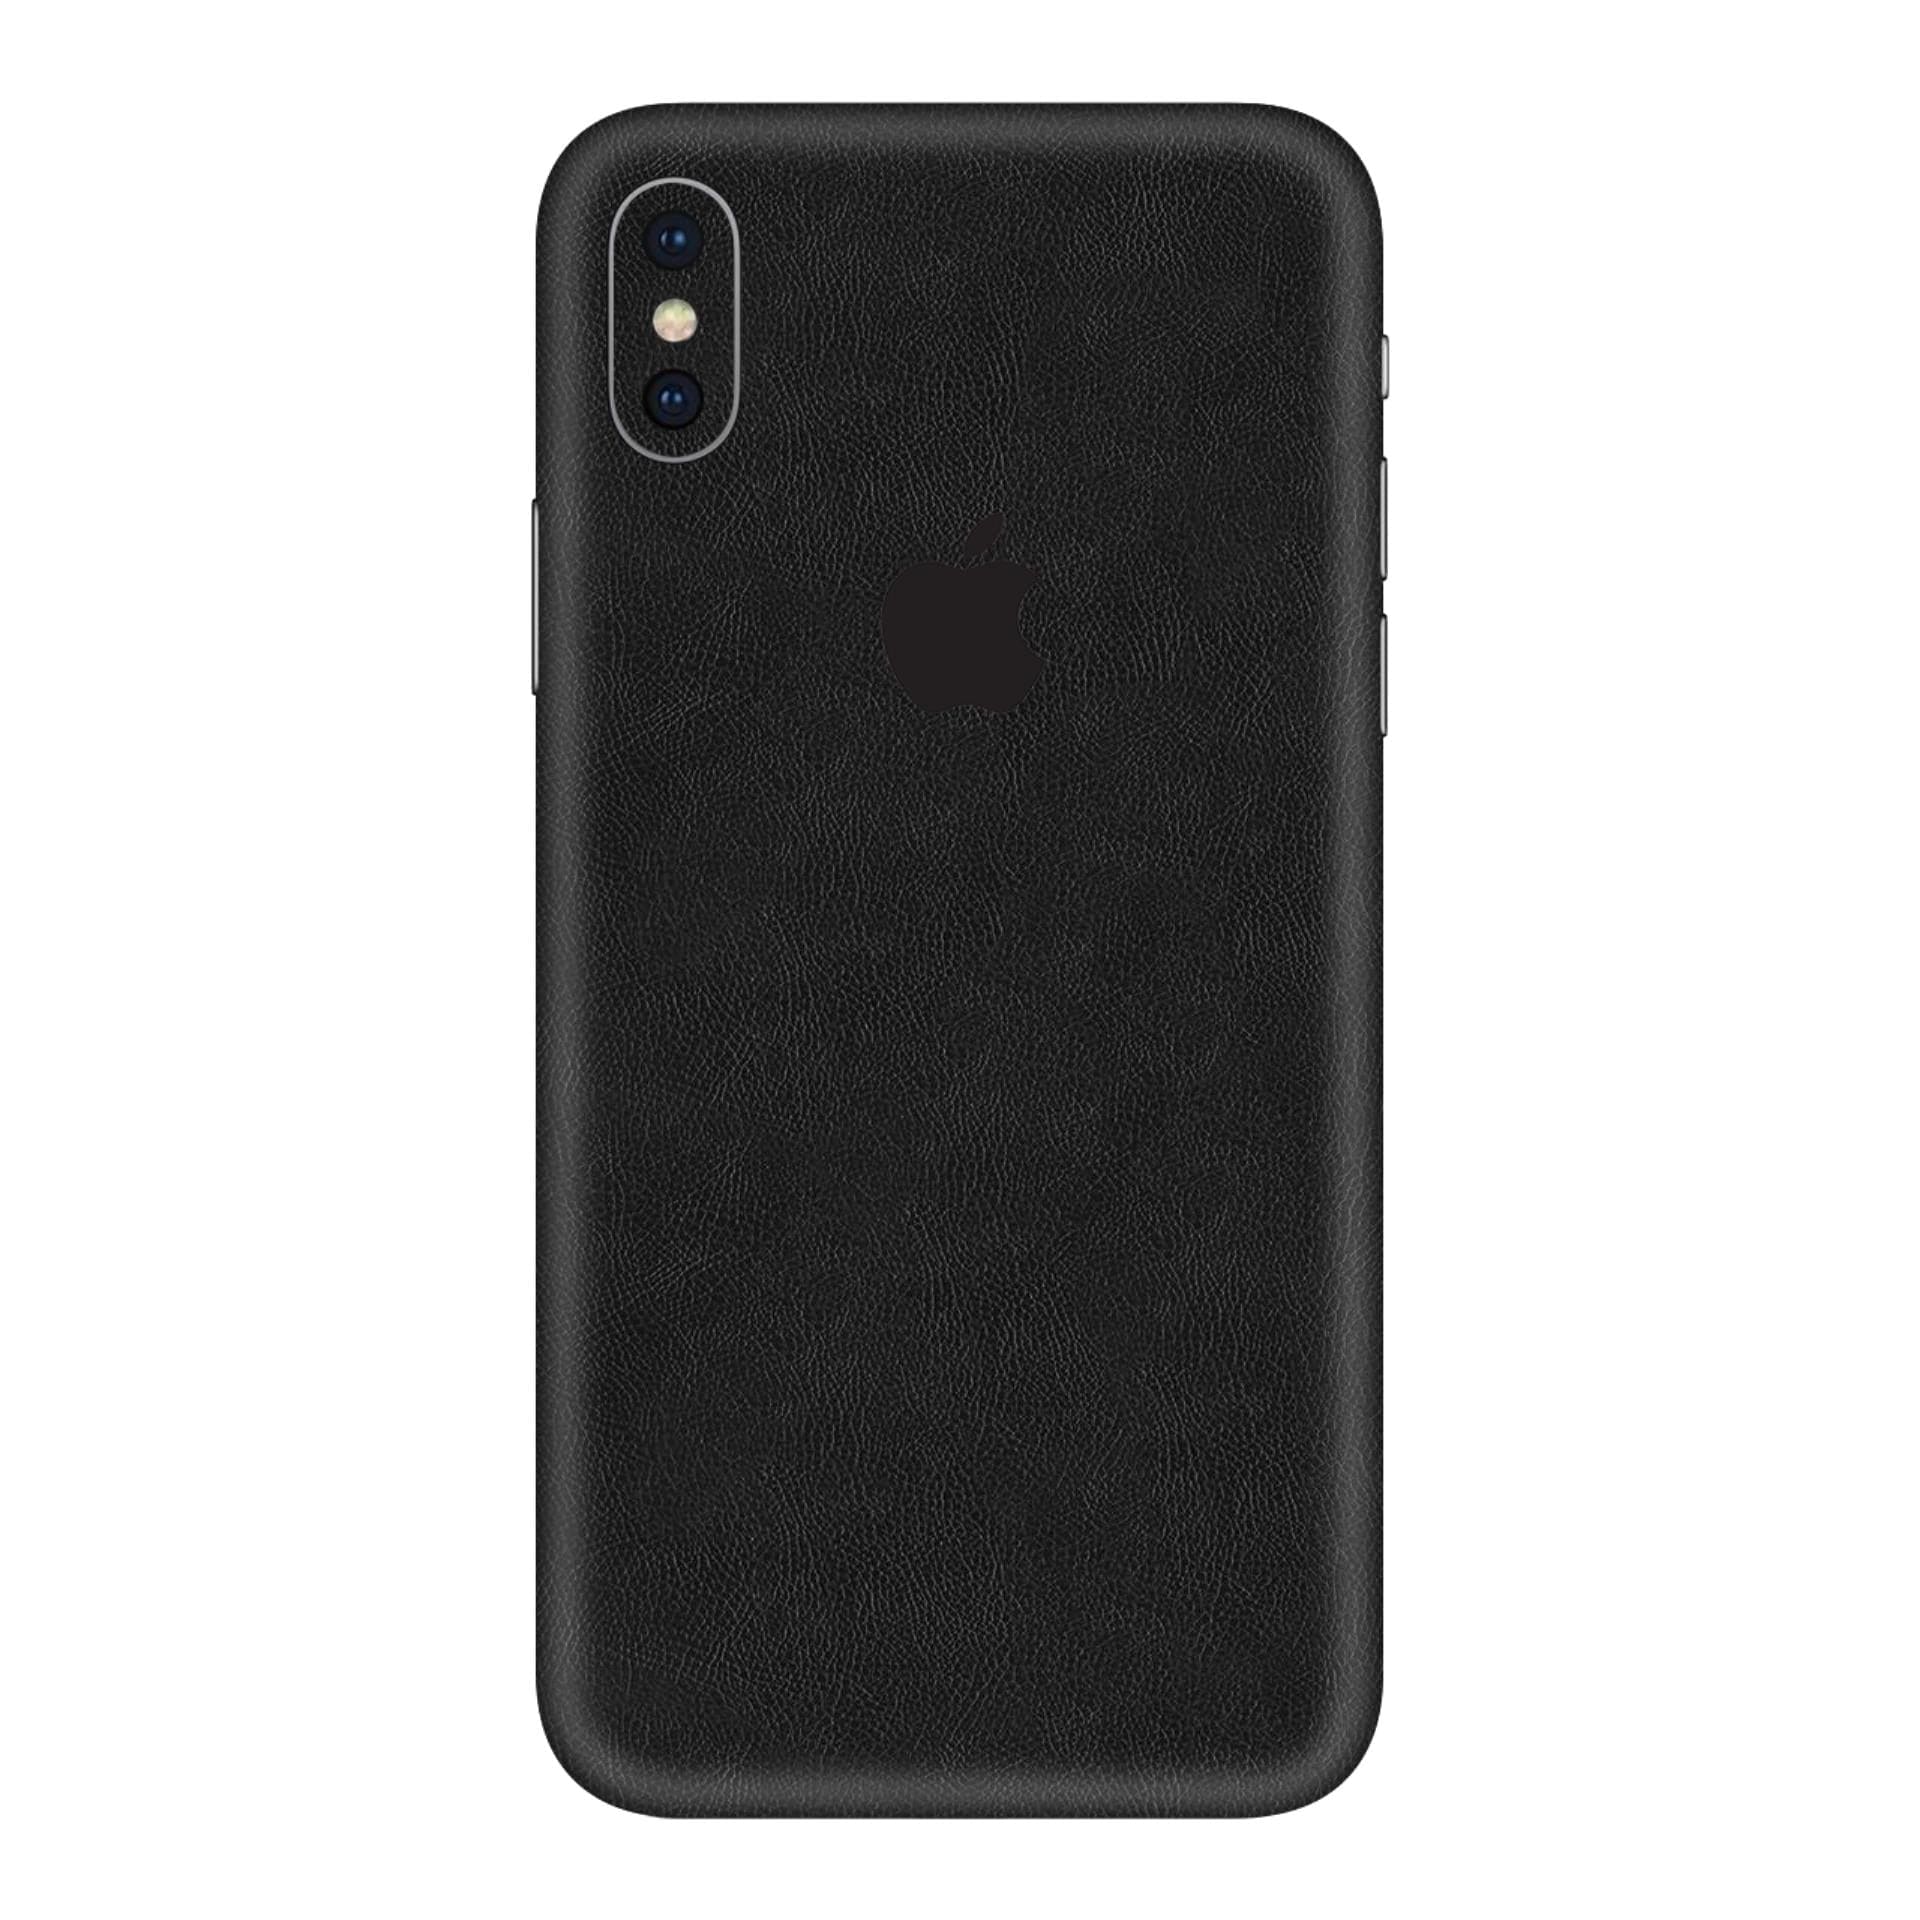 iphone XS Max Black Leather skins